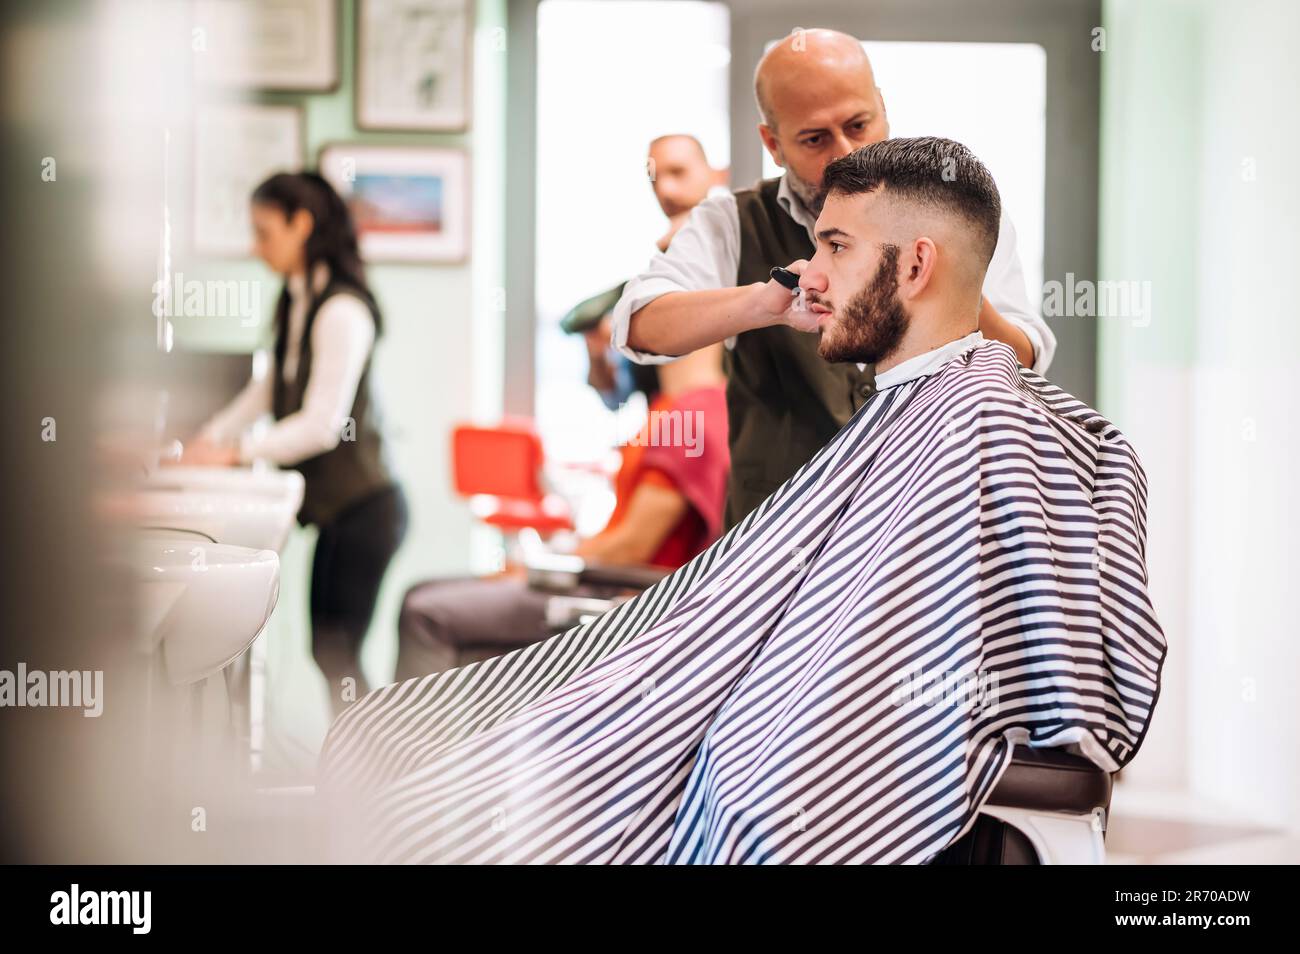 3 Alamy Page hi-res photography - stock images and - Barber stripe